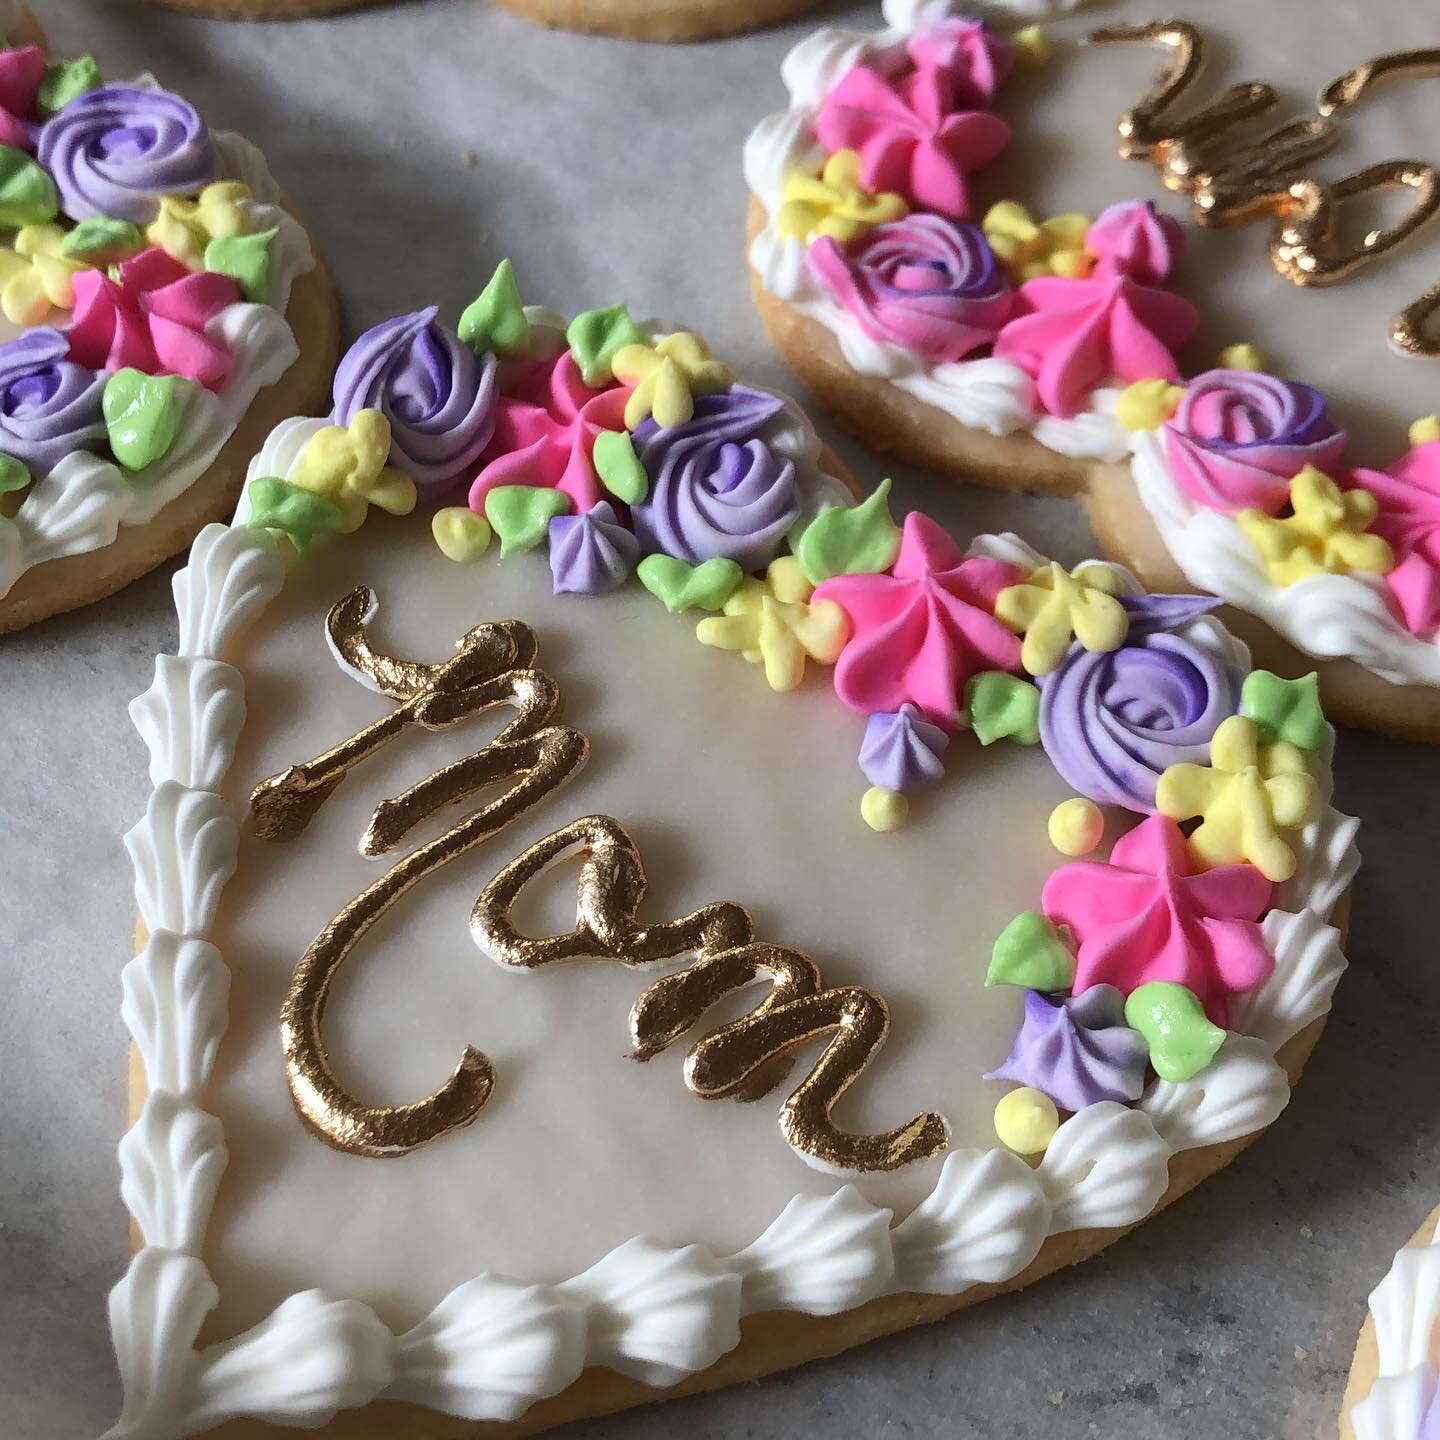 Mother&rsquo;s Day cookies! 

https://www.sweetandshiny.com/shop/p/mothers-day-bouquet